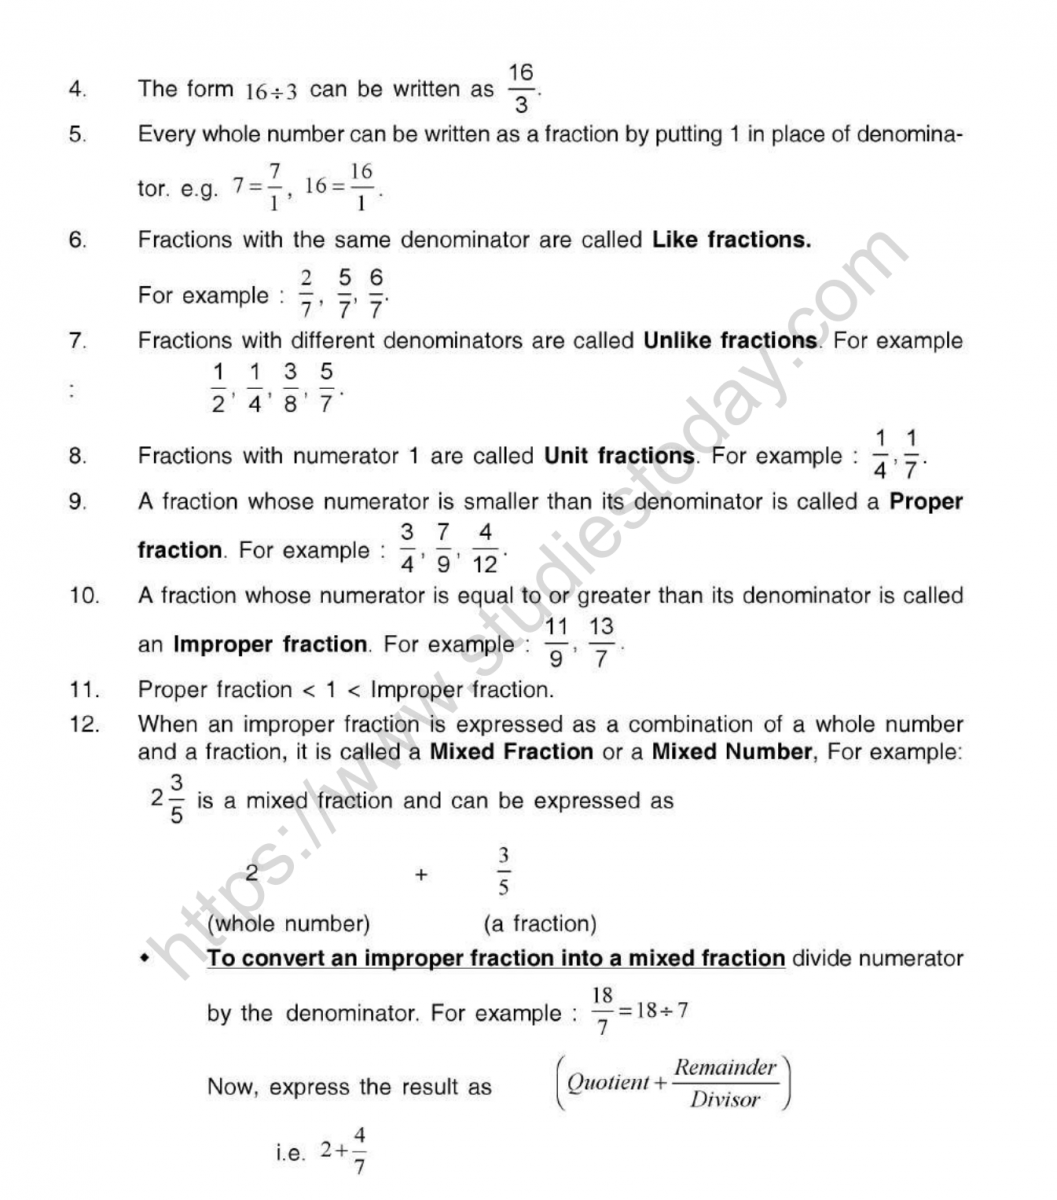 case study questions for fractions